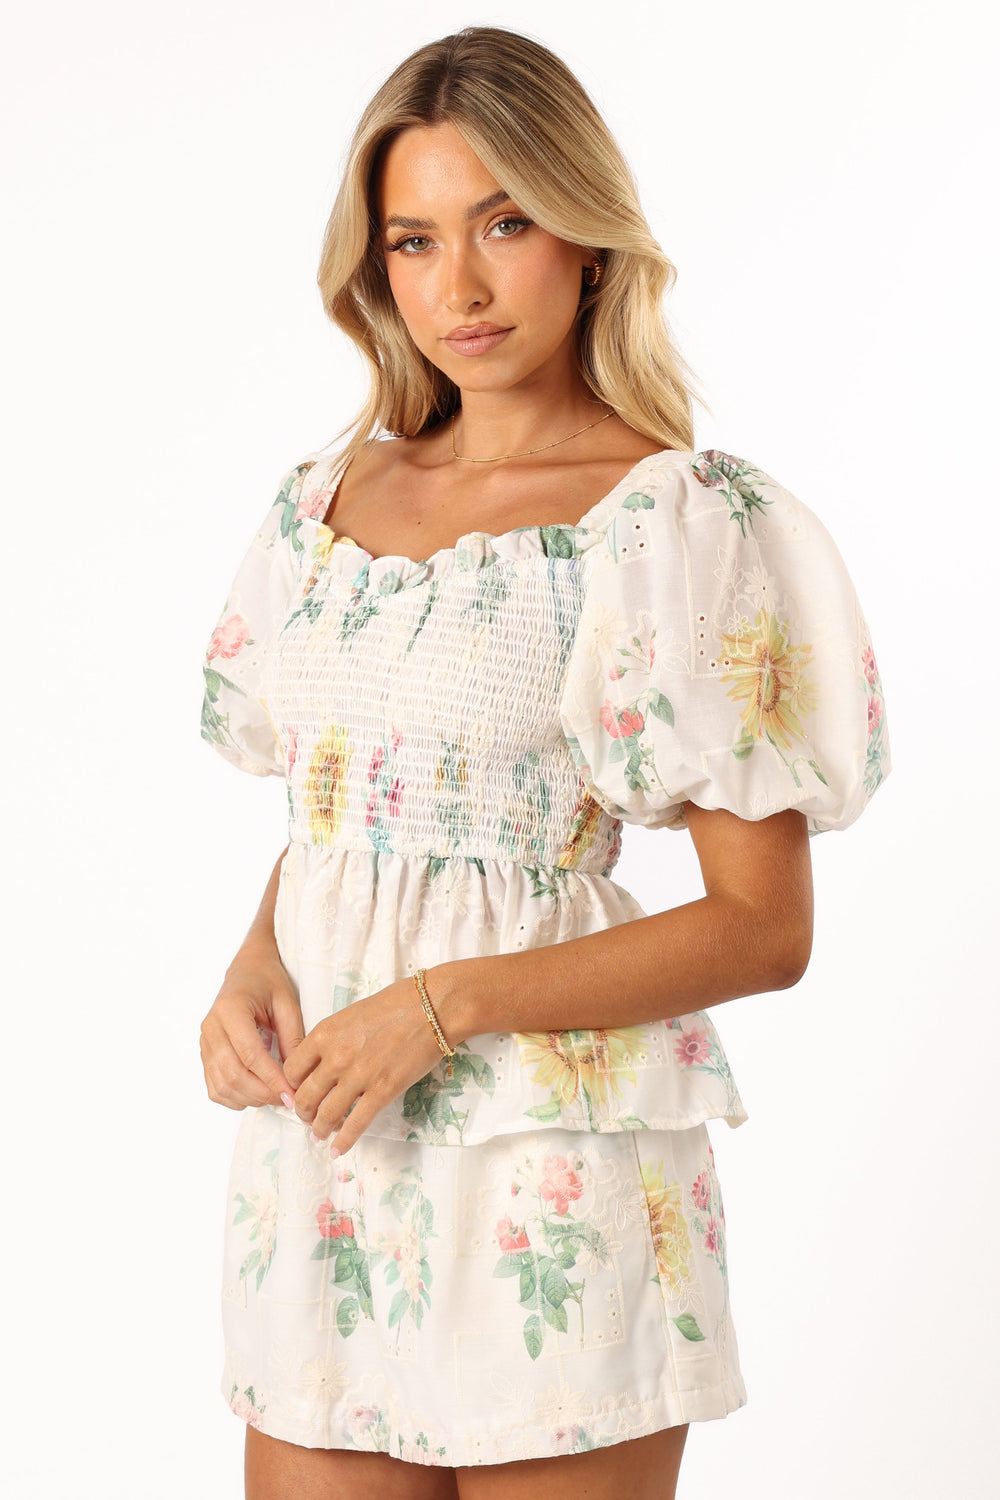 Petal and Pup USA TOPS Amalie Top - White Floral